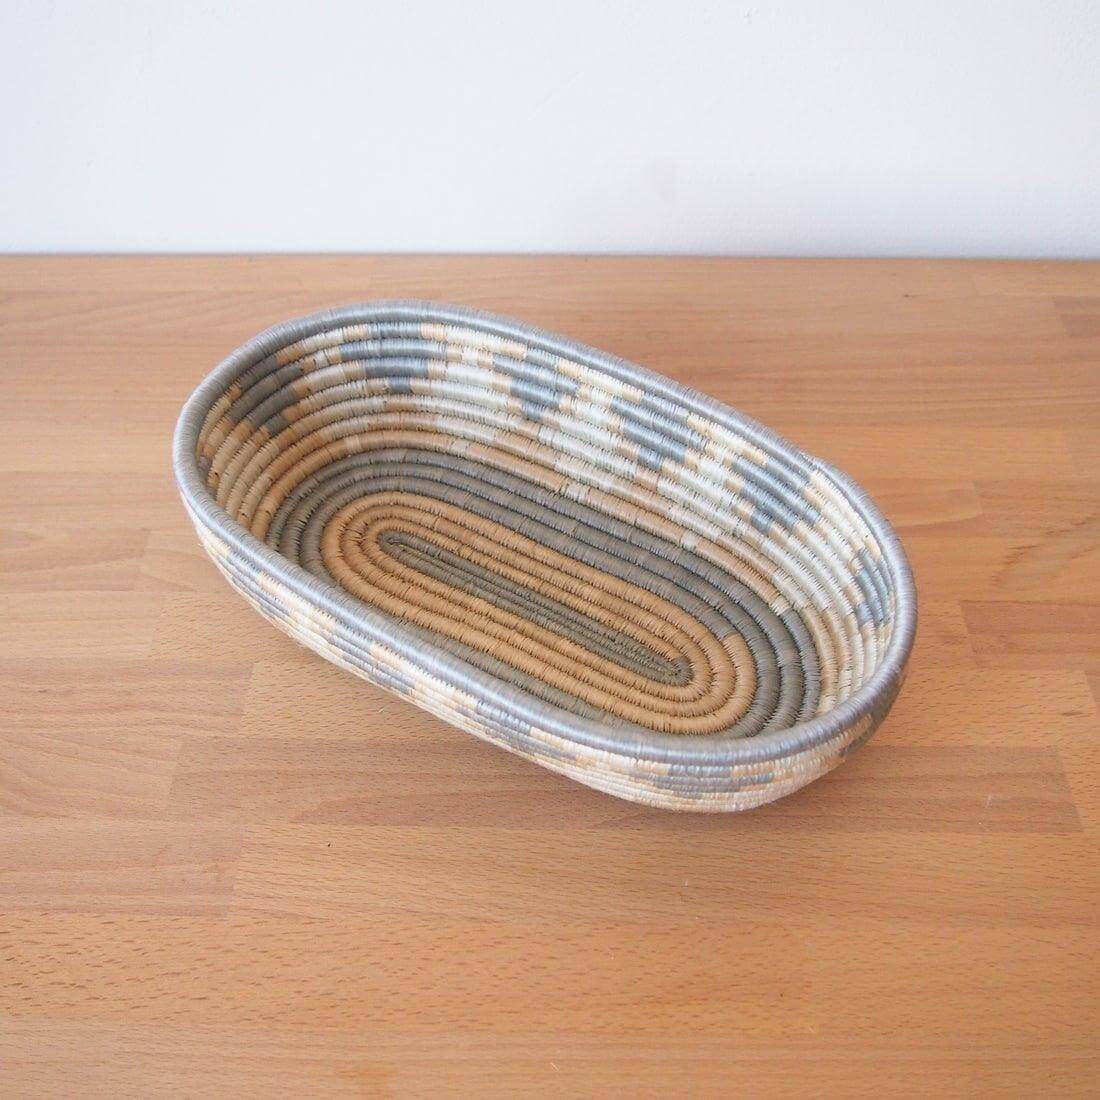 African seagrass bread basket